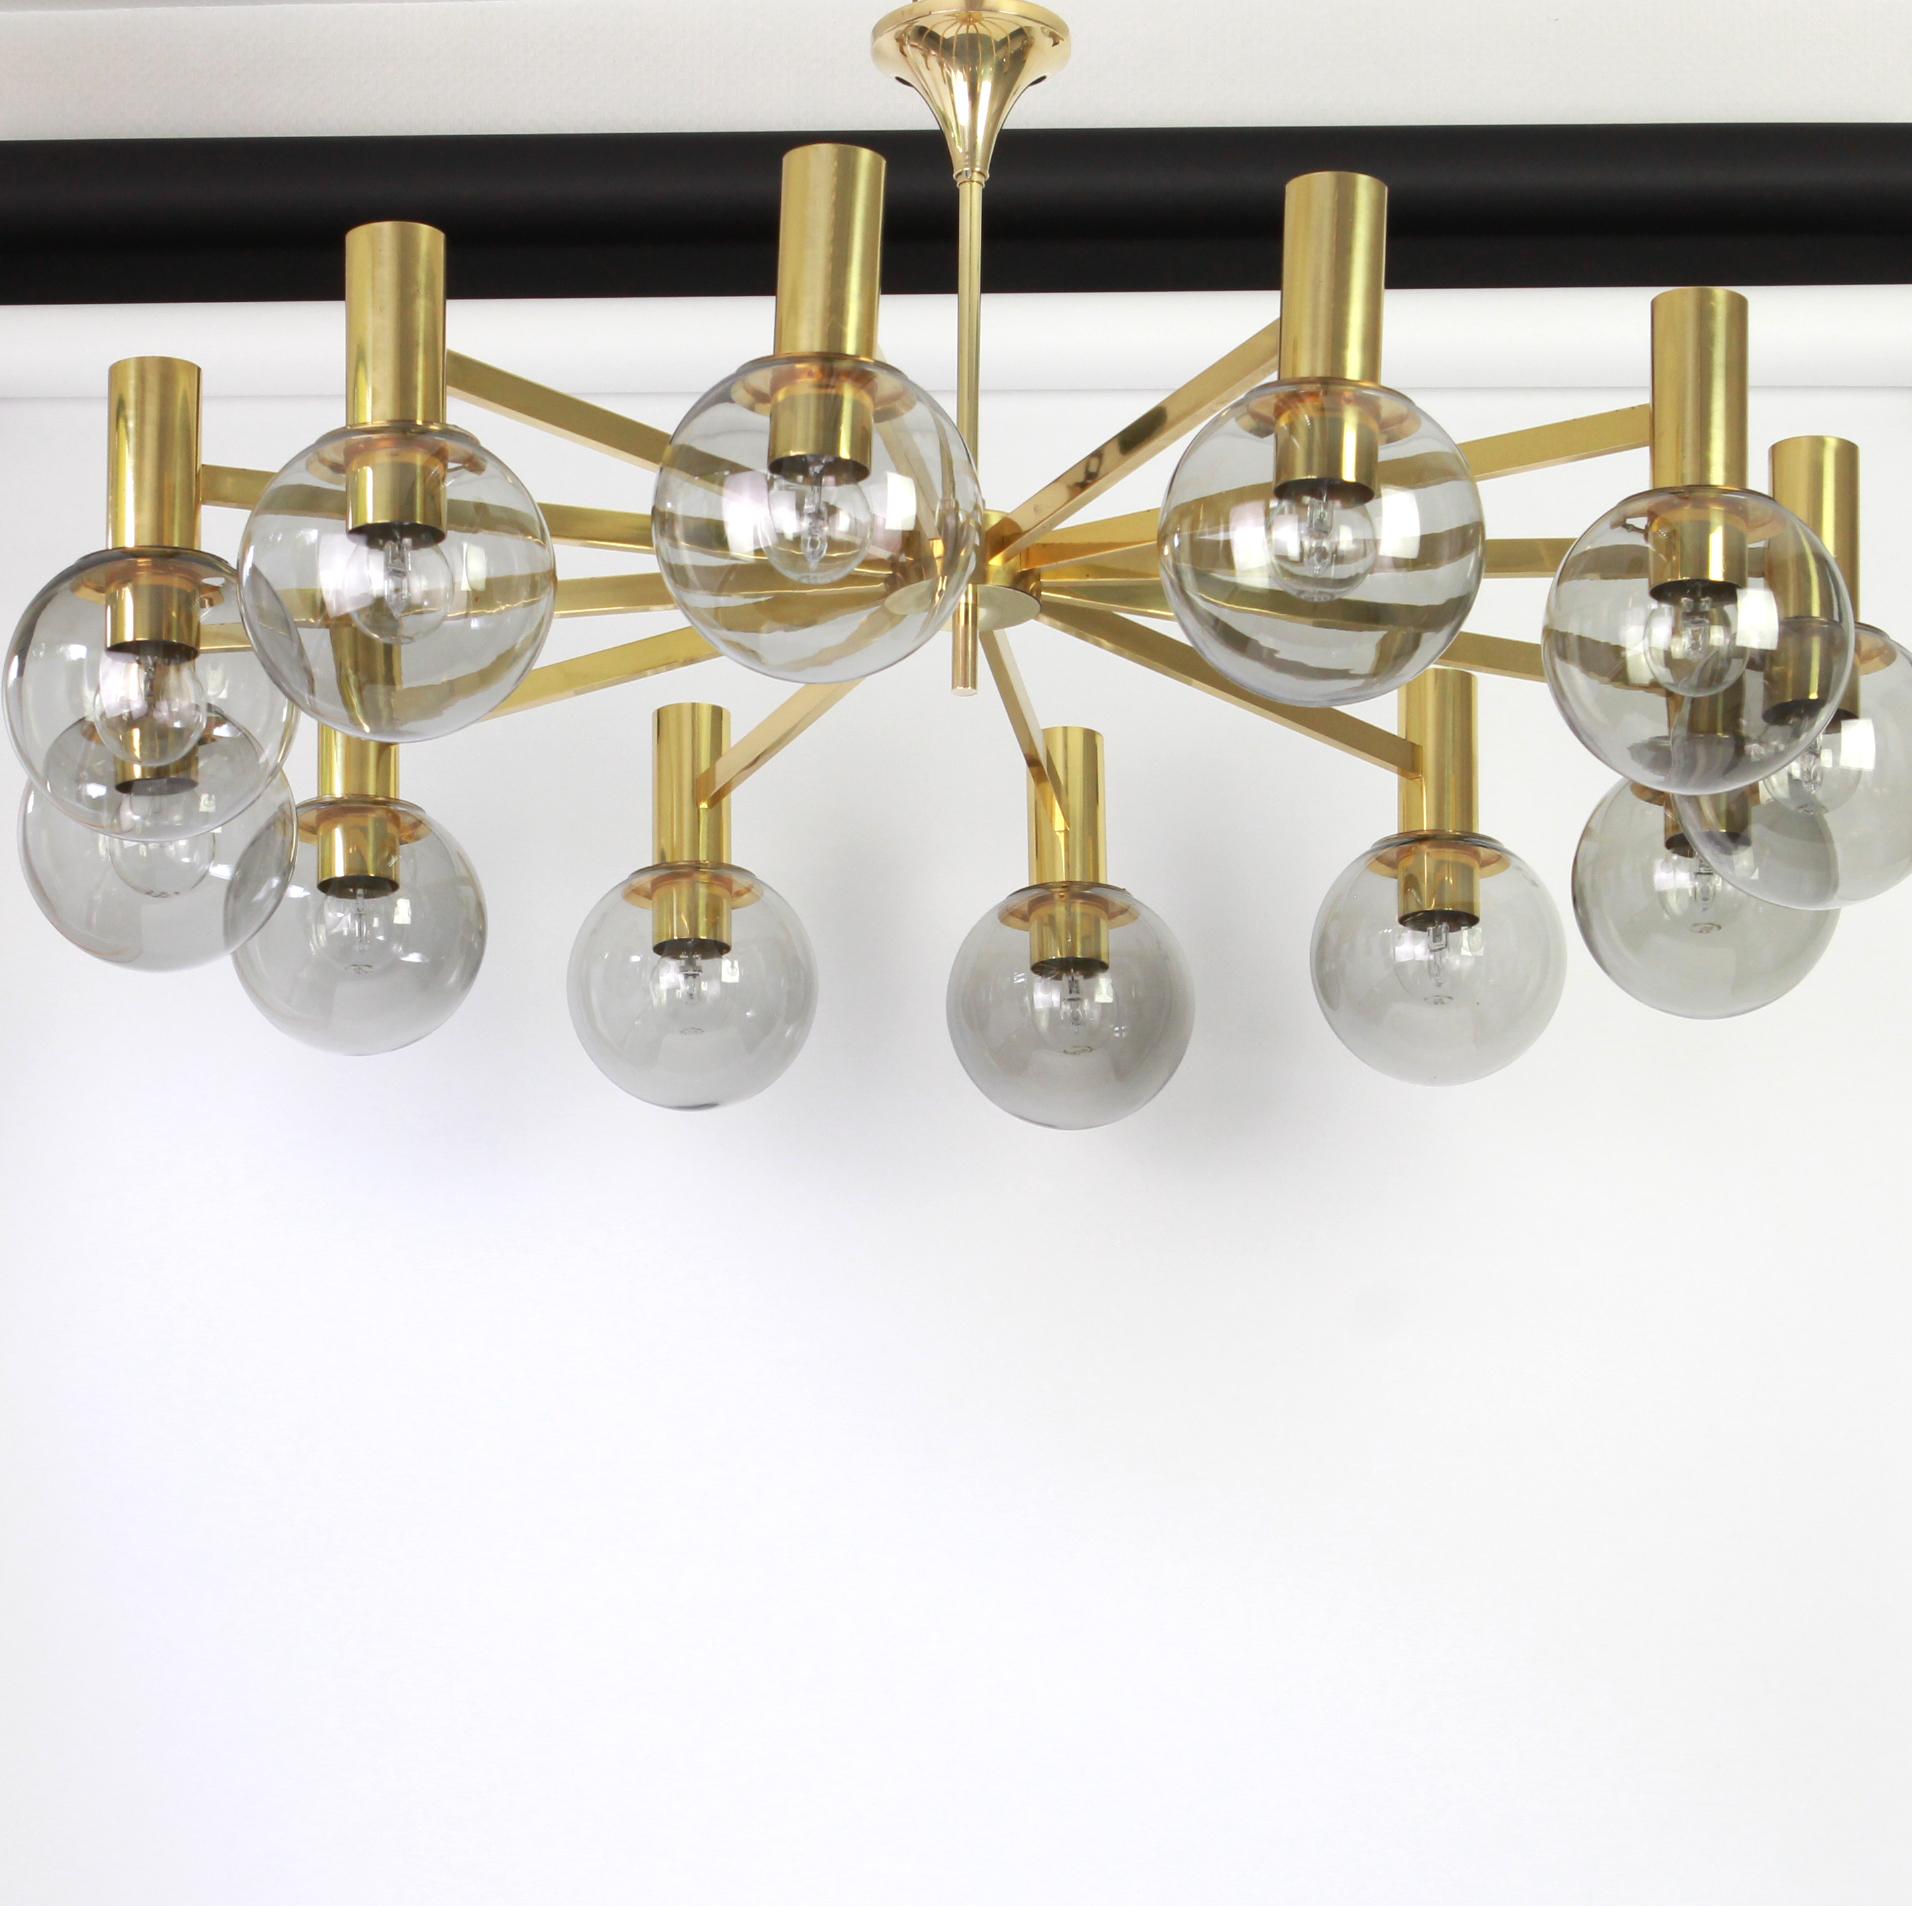 Twelve-light brass chandelier.
Smoked glass in a very beautiful Smokey brown color.
Made with brass and brass-plated metal, best of the 1960s.

High quality and in very good original condition. Cleaned, well-wired and ready to use. 

The fixture